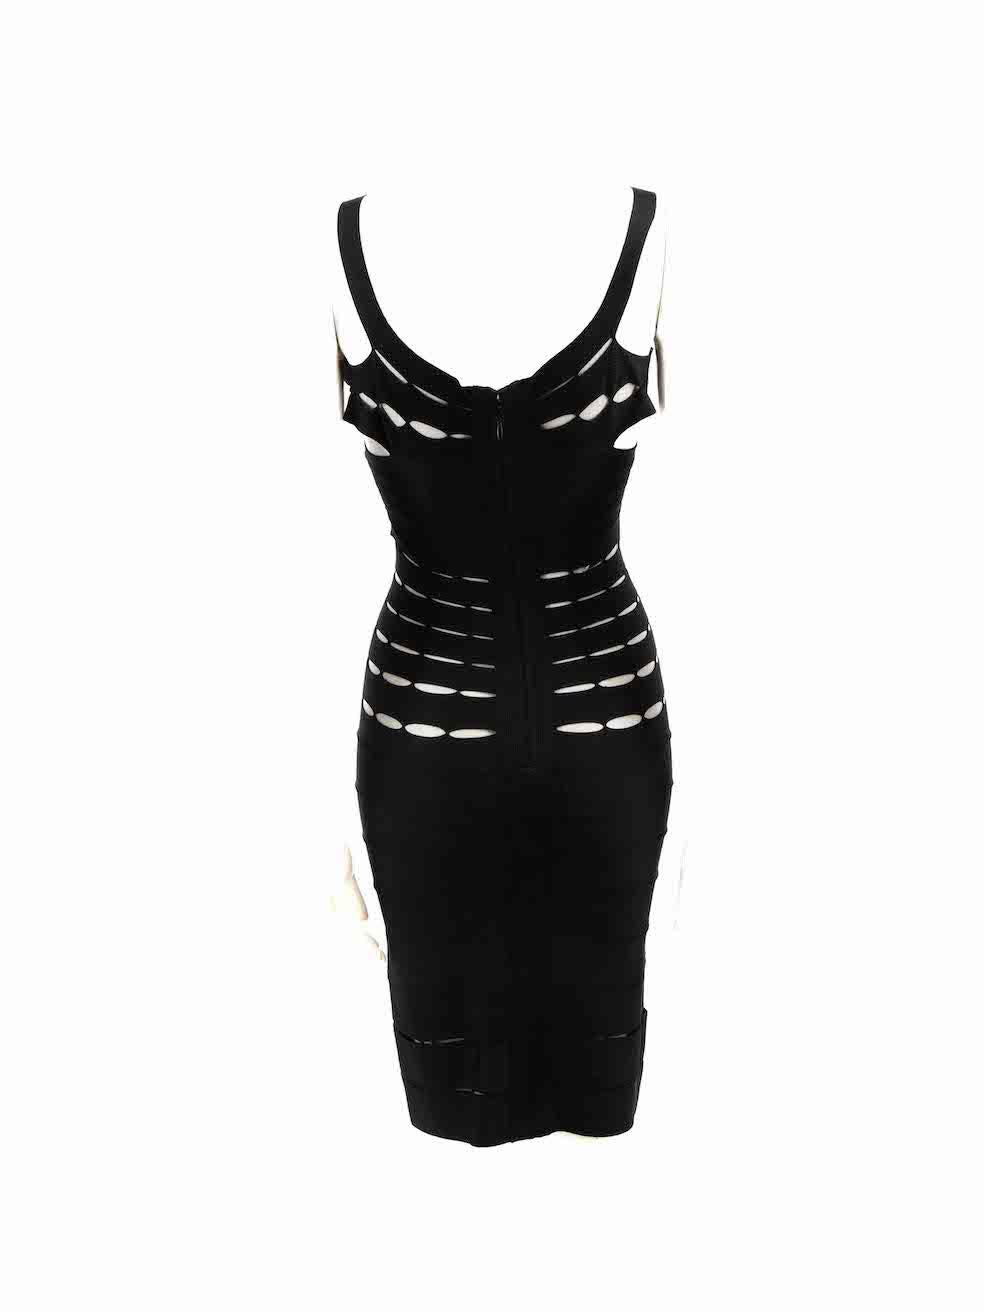 Herve Leger Black Off-Shoulder Cut Out Midi Dress Size XS In Good Condition For Sale In London, GB